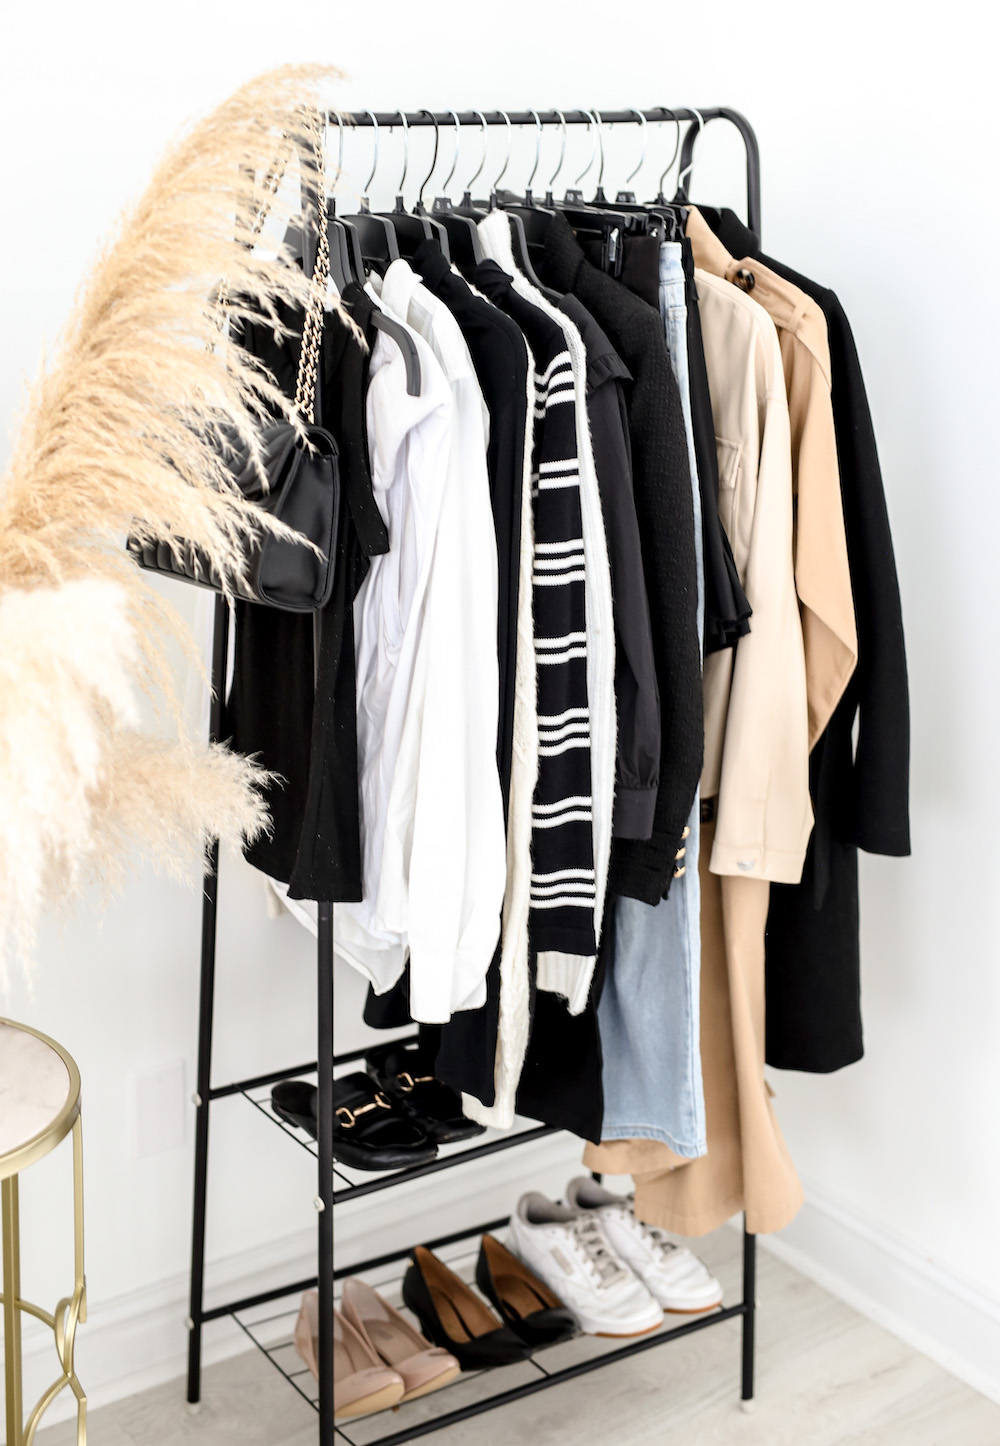 How to build a timeless capsule wardrobe